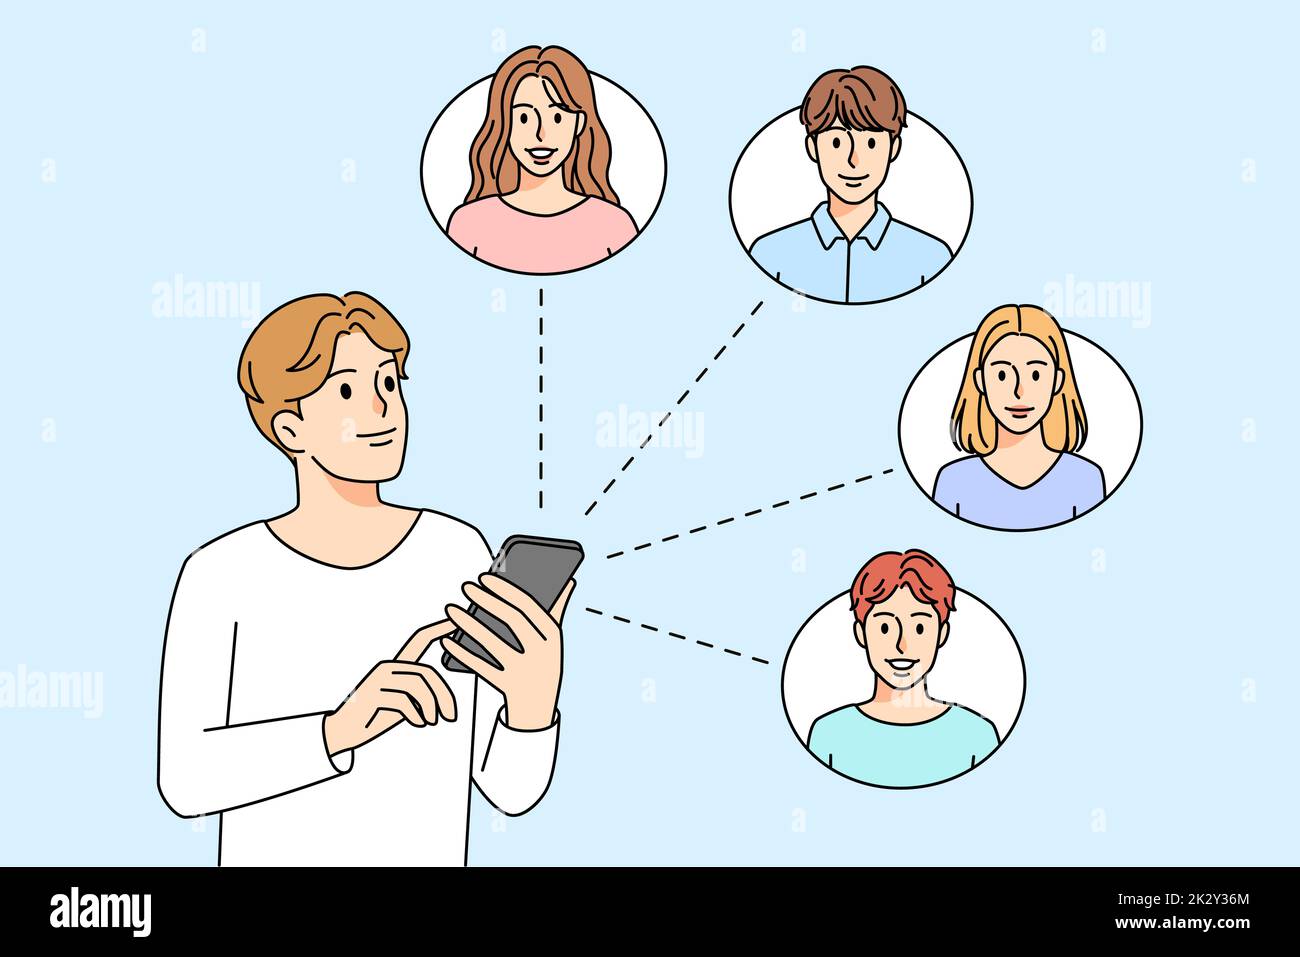 Man communicate online with people Stock Photo